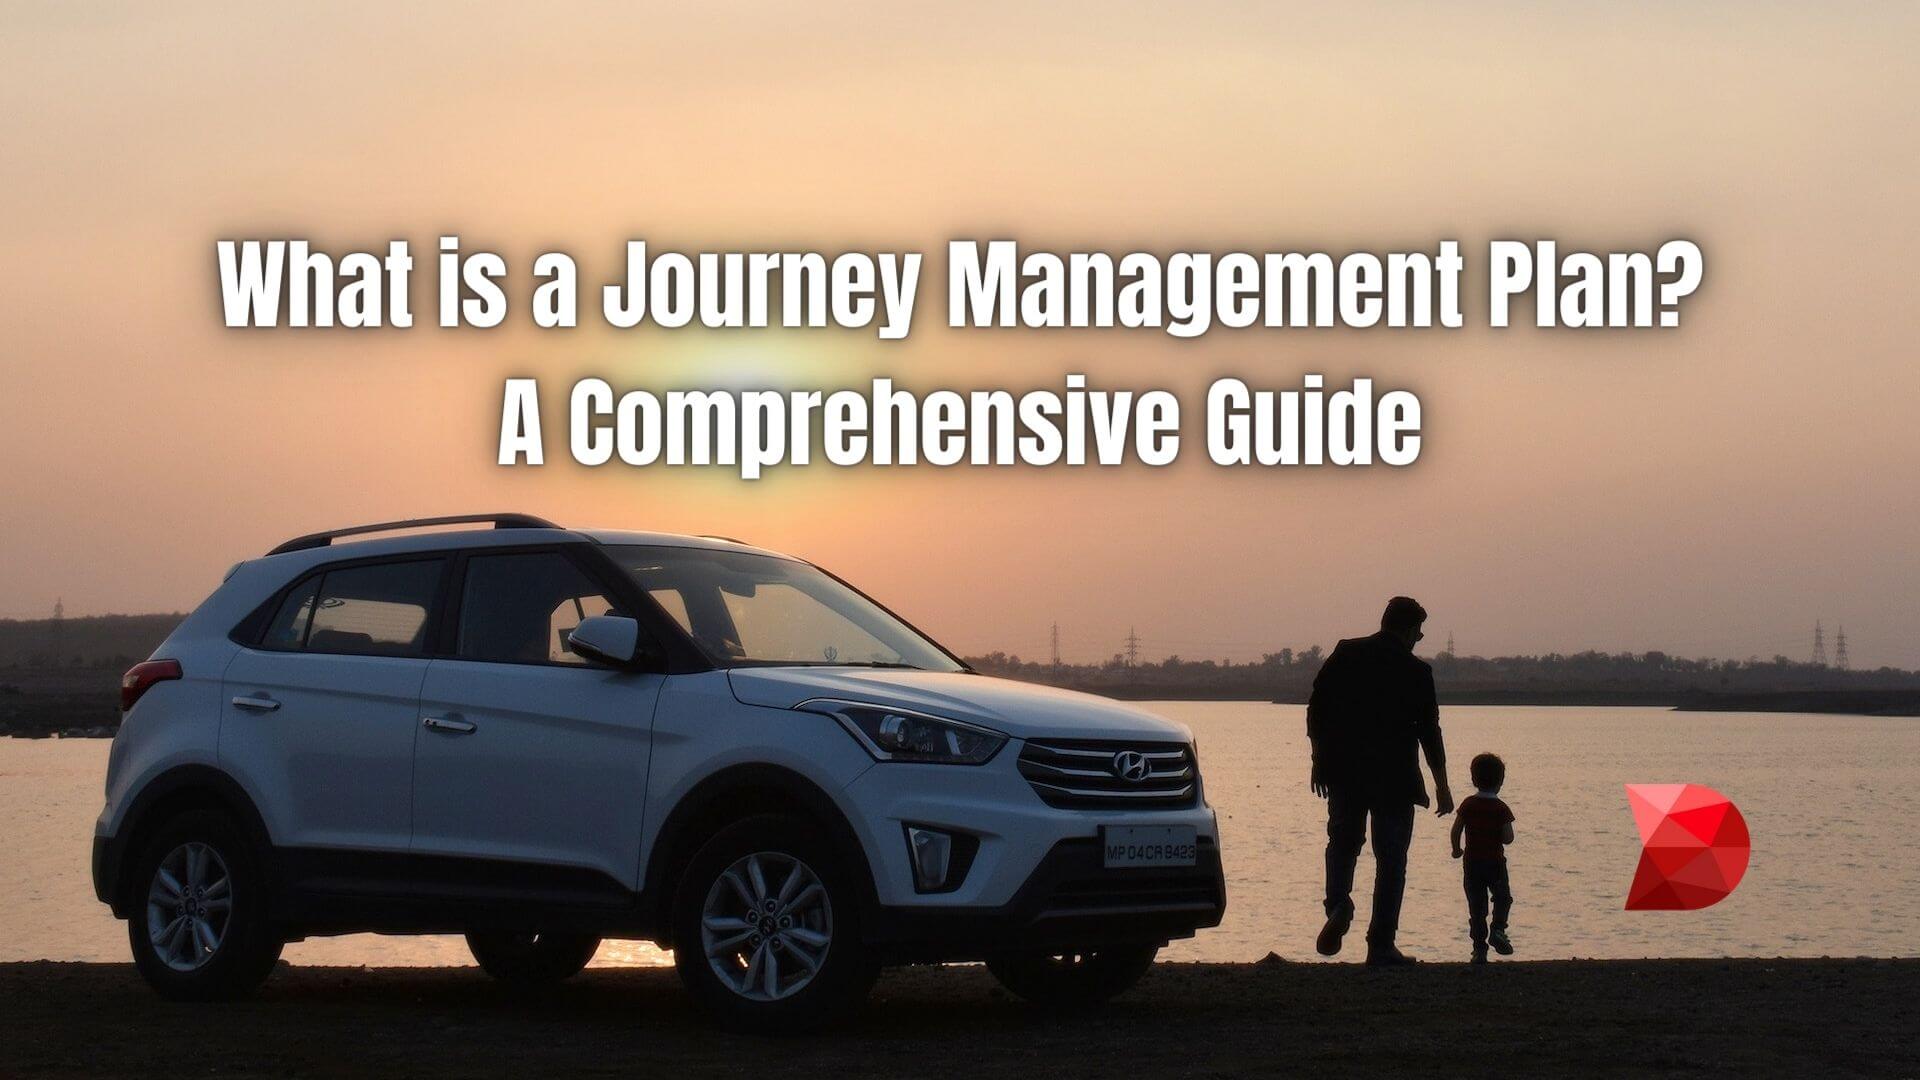 Journey management plans are essential for road journeys' safety and efficiency. Here's how to create them, and why they're so important.